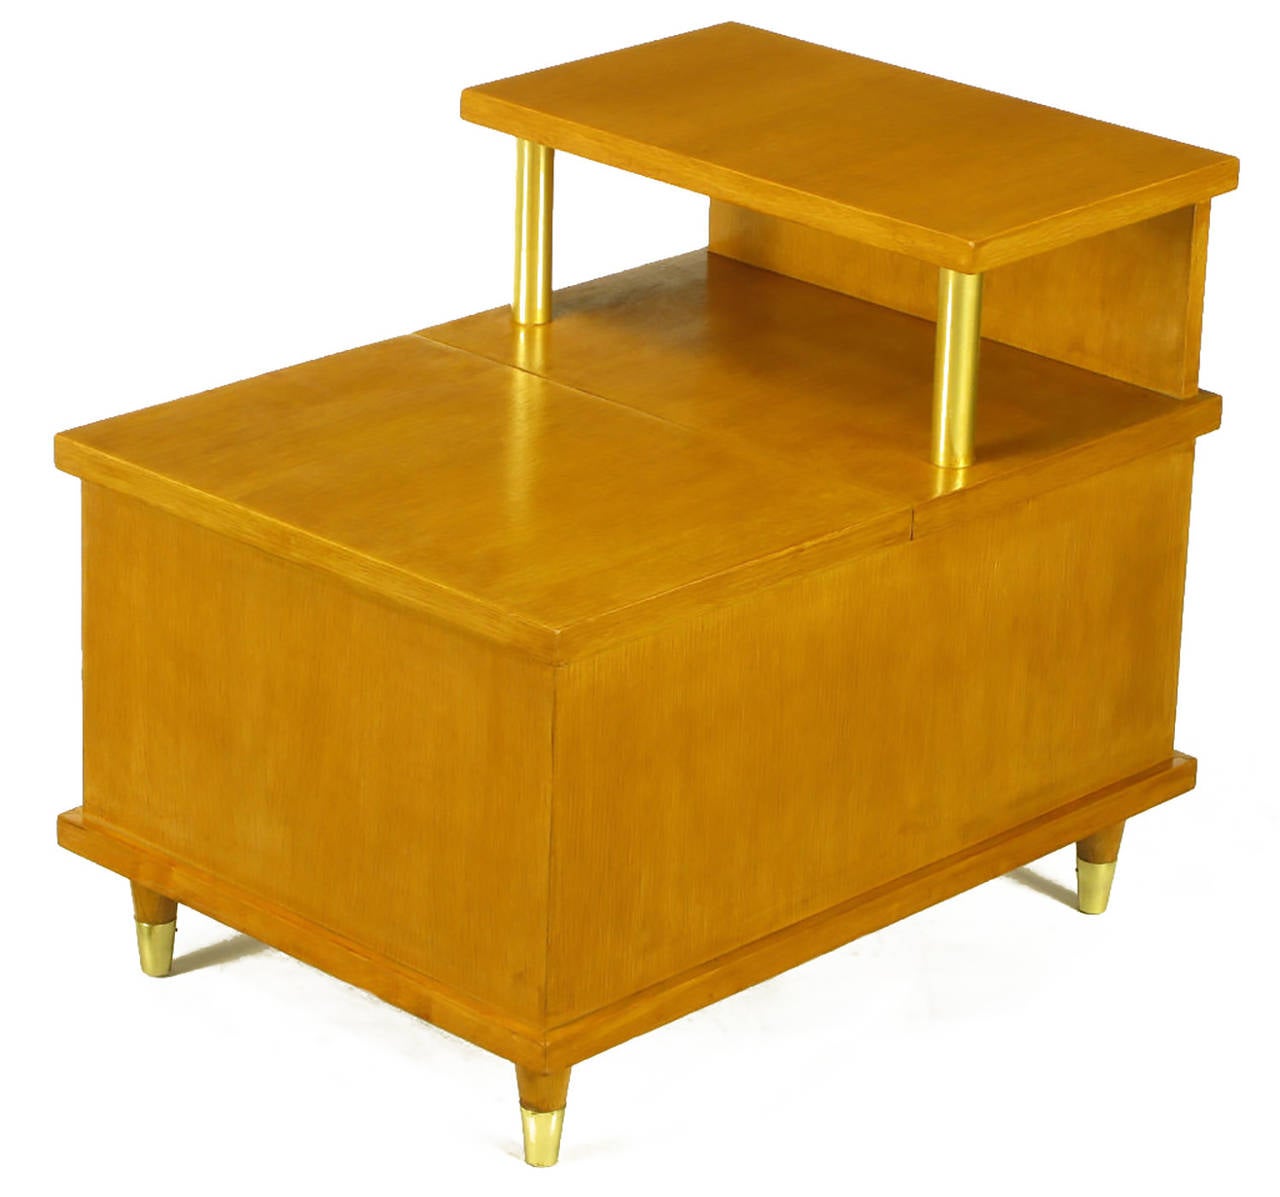 American Pair of Two-Tier End Tables with Cedar-Lined Storage